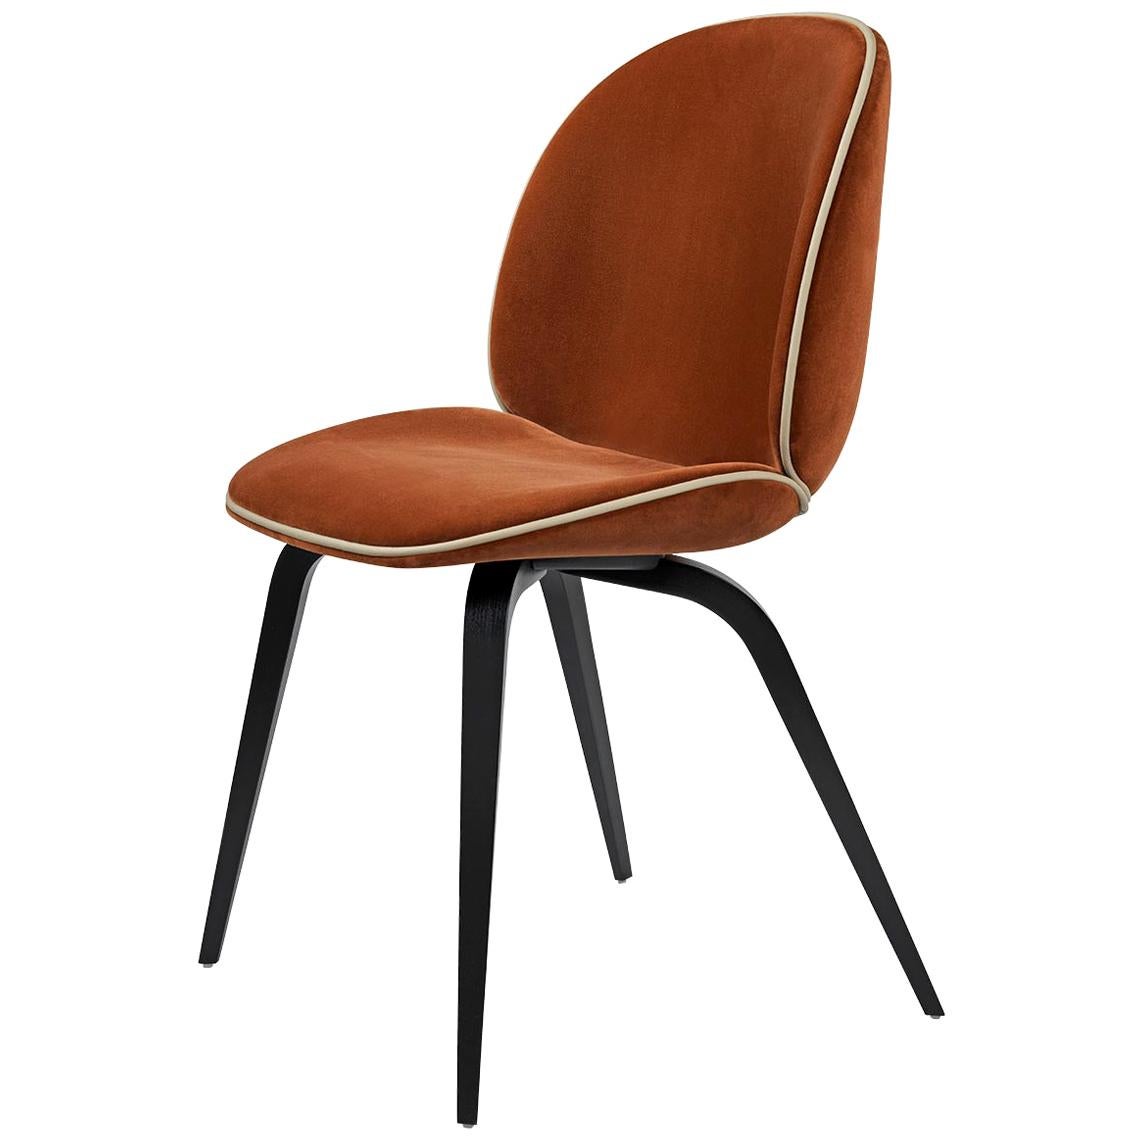 Beetle Dining Chair, Fully Upholstered, American Walnut